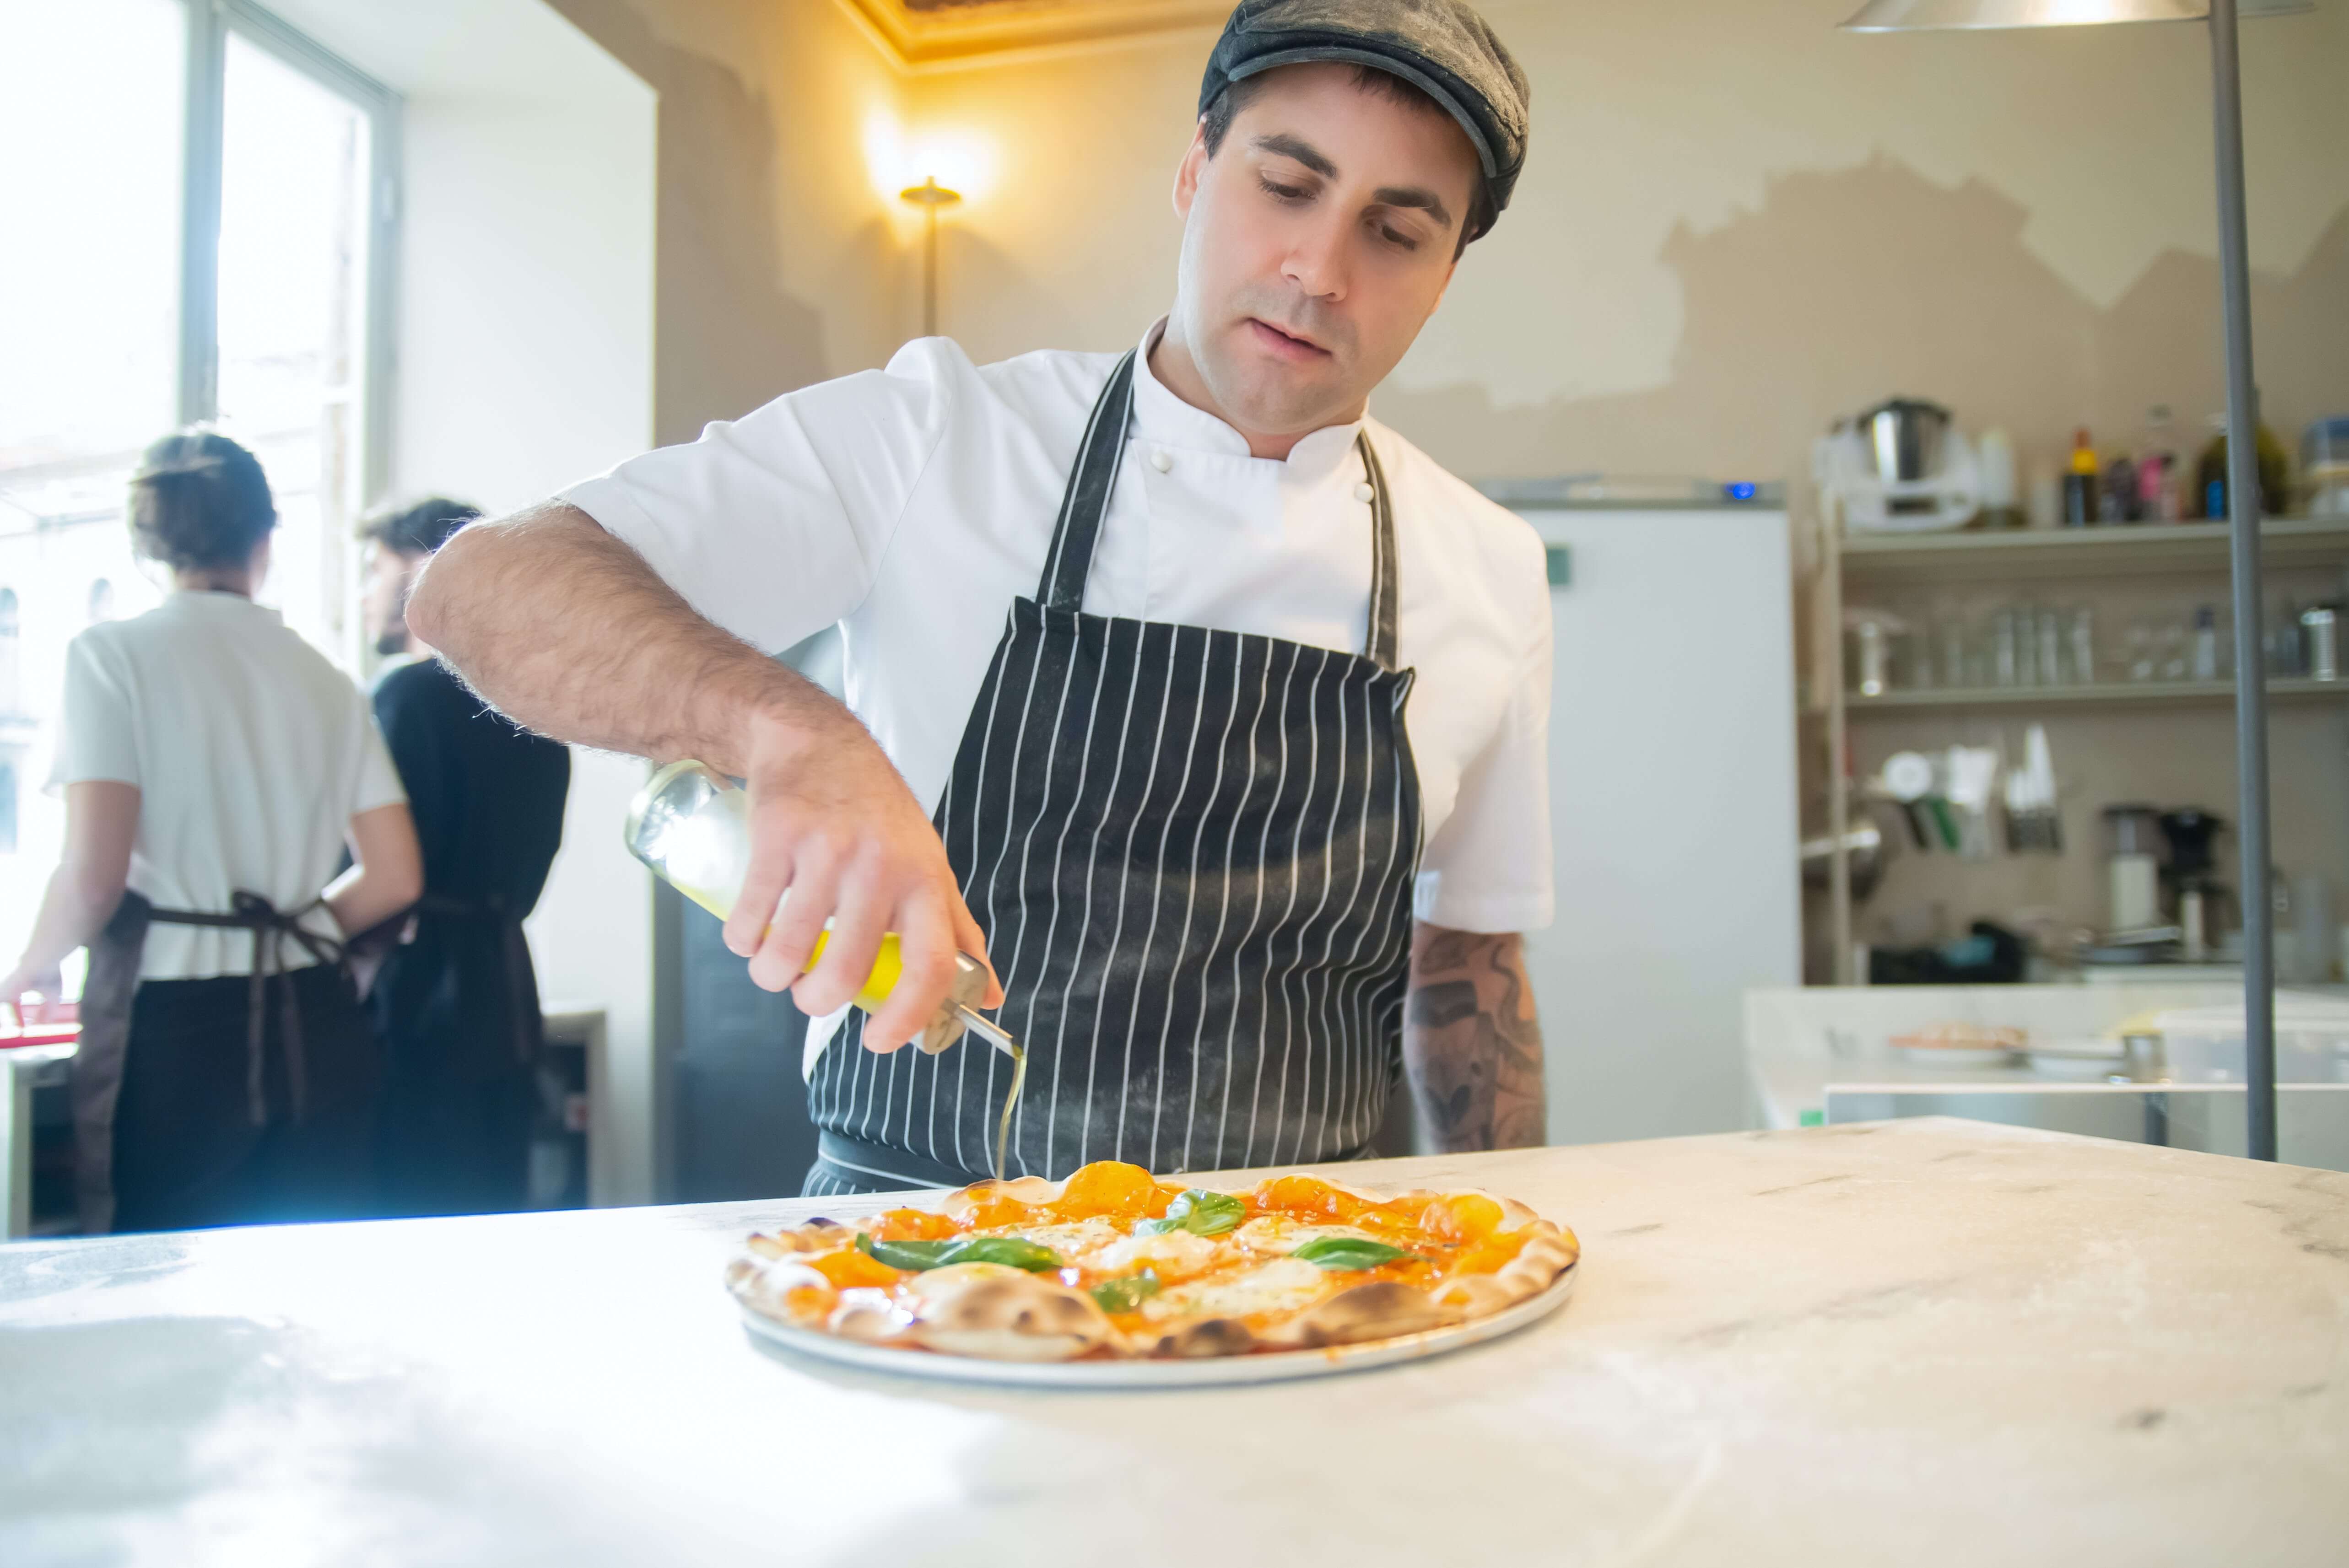 The Key Benefits of a High-Performance Pizza Prep Table